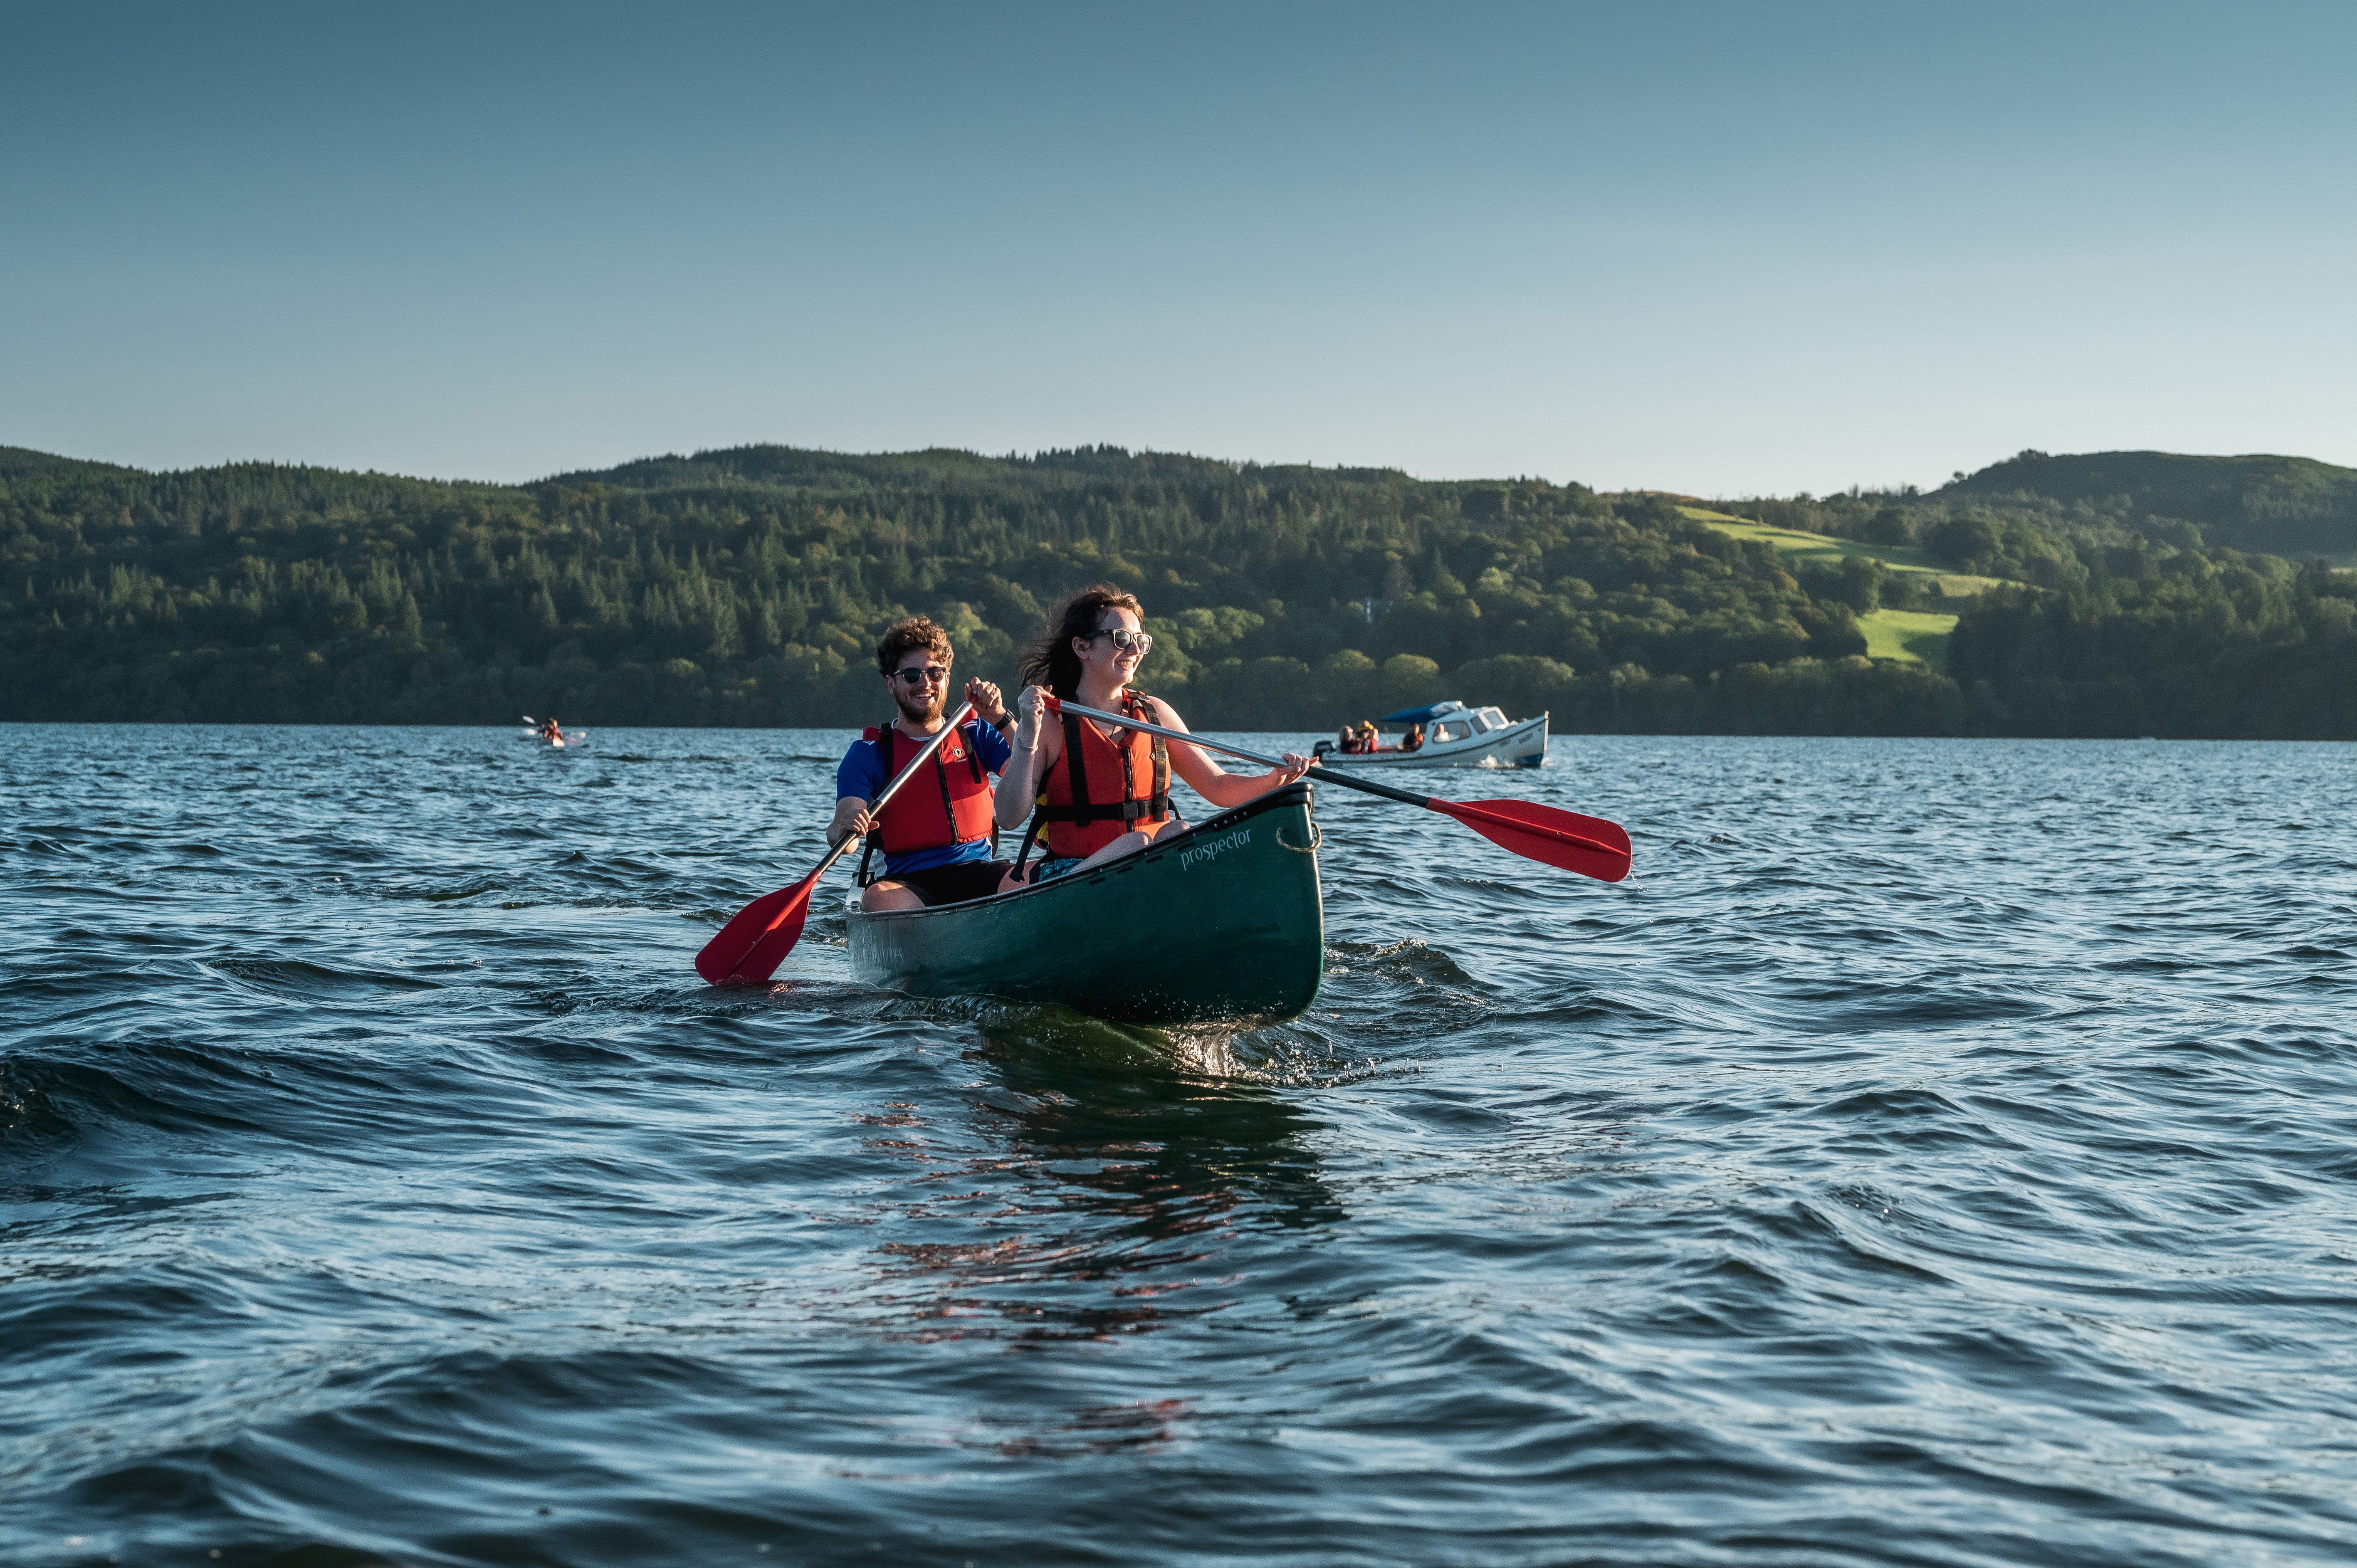 Paddling a Canadian canoe on Coniston Water copyright Dave Willis